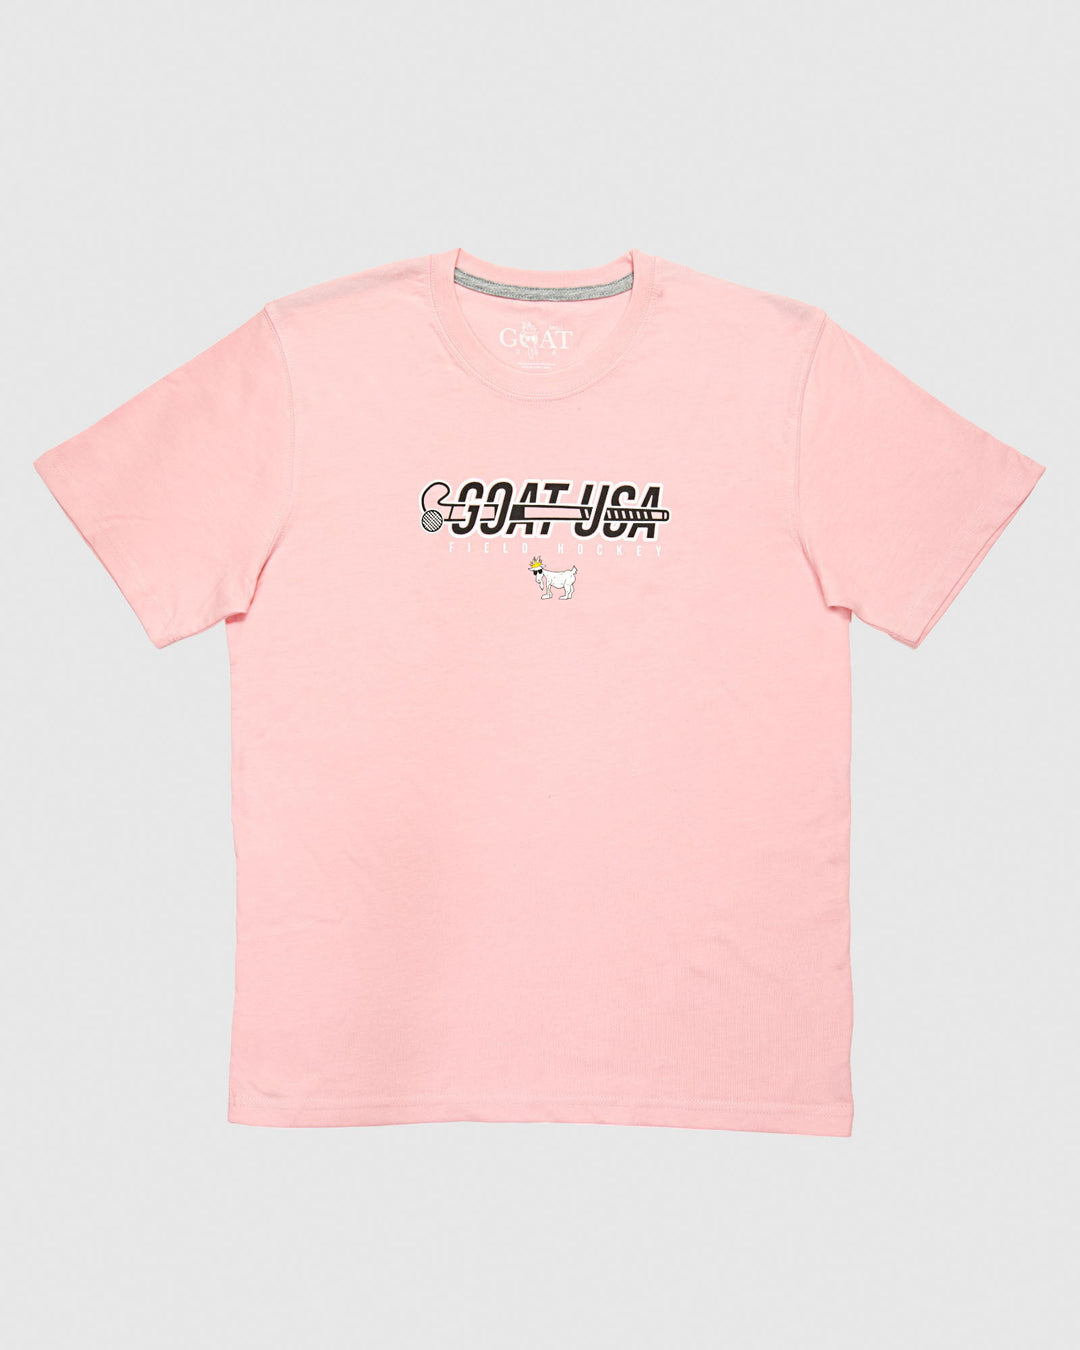 Pink shirt with field hockey stick that goes through the wording "GOAT USA"